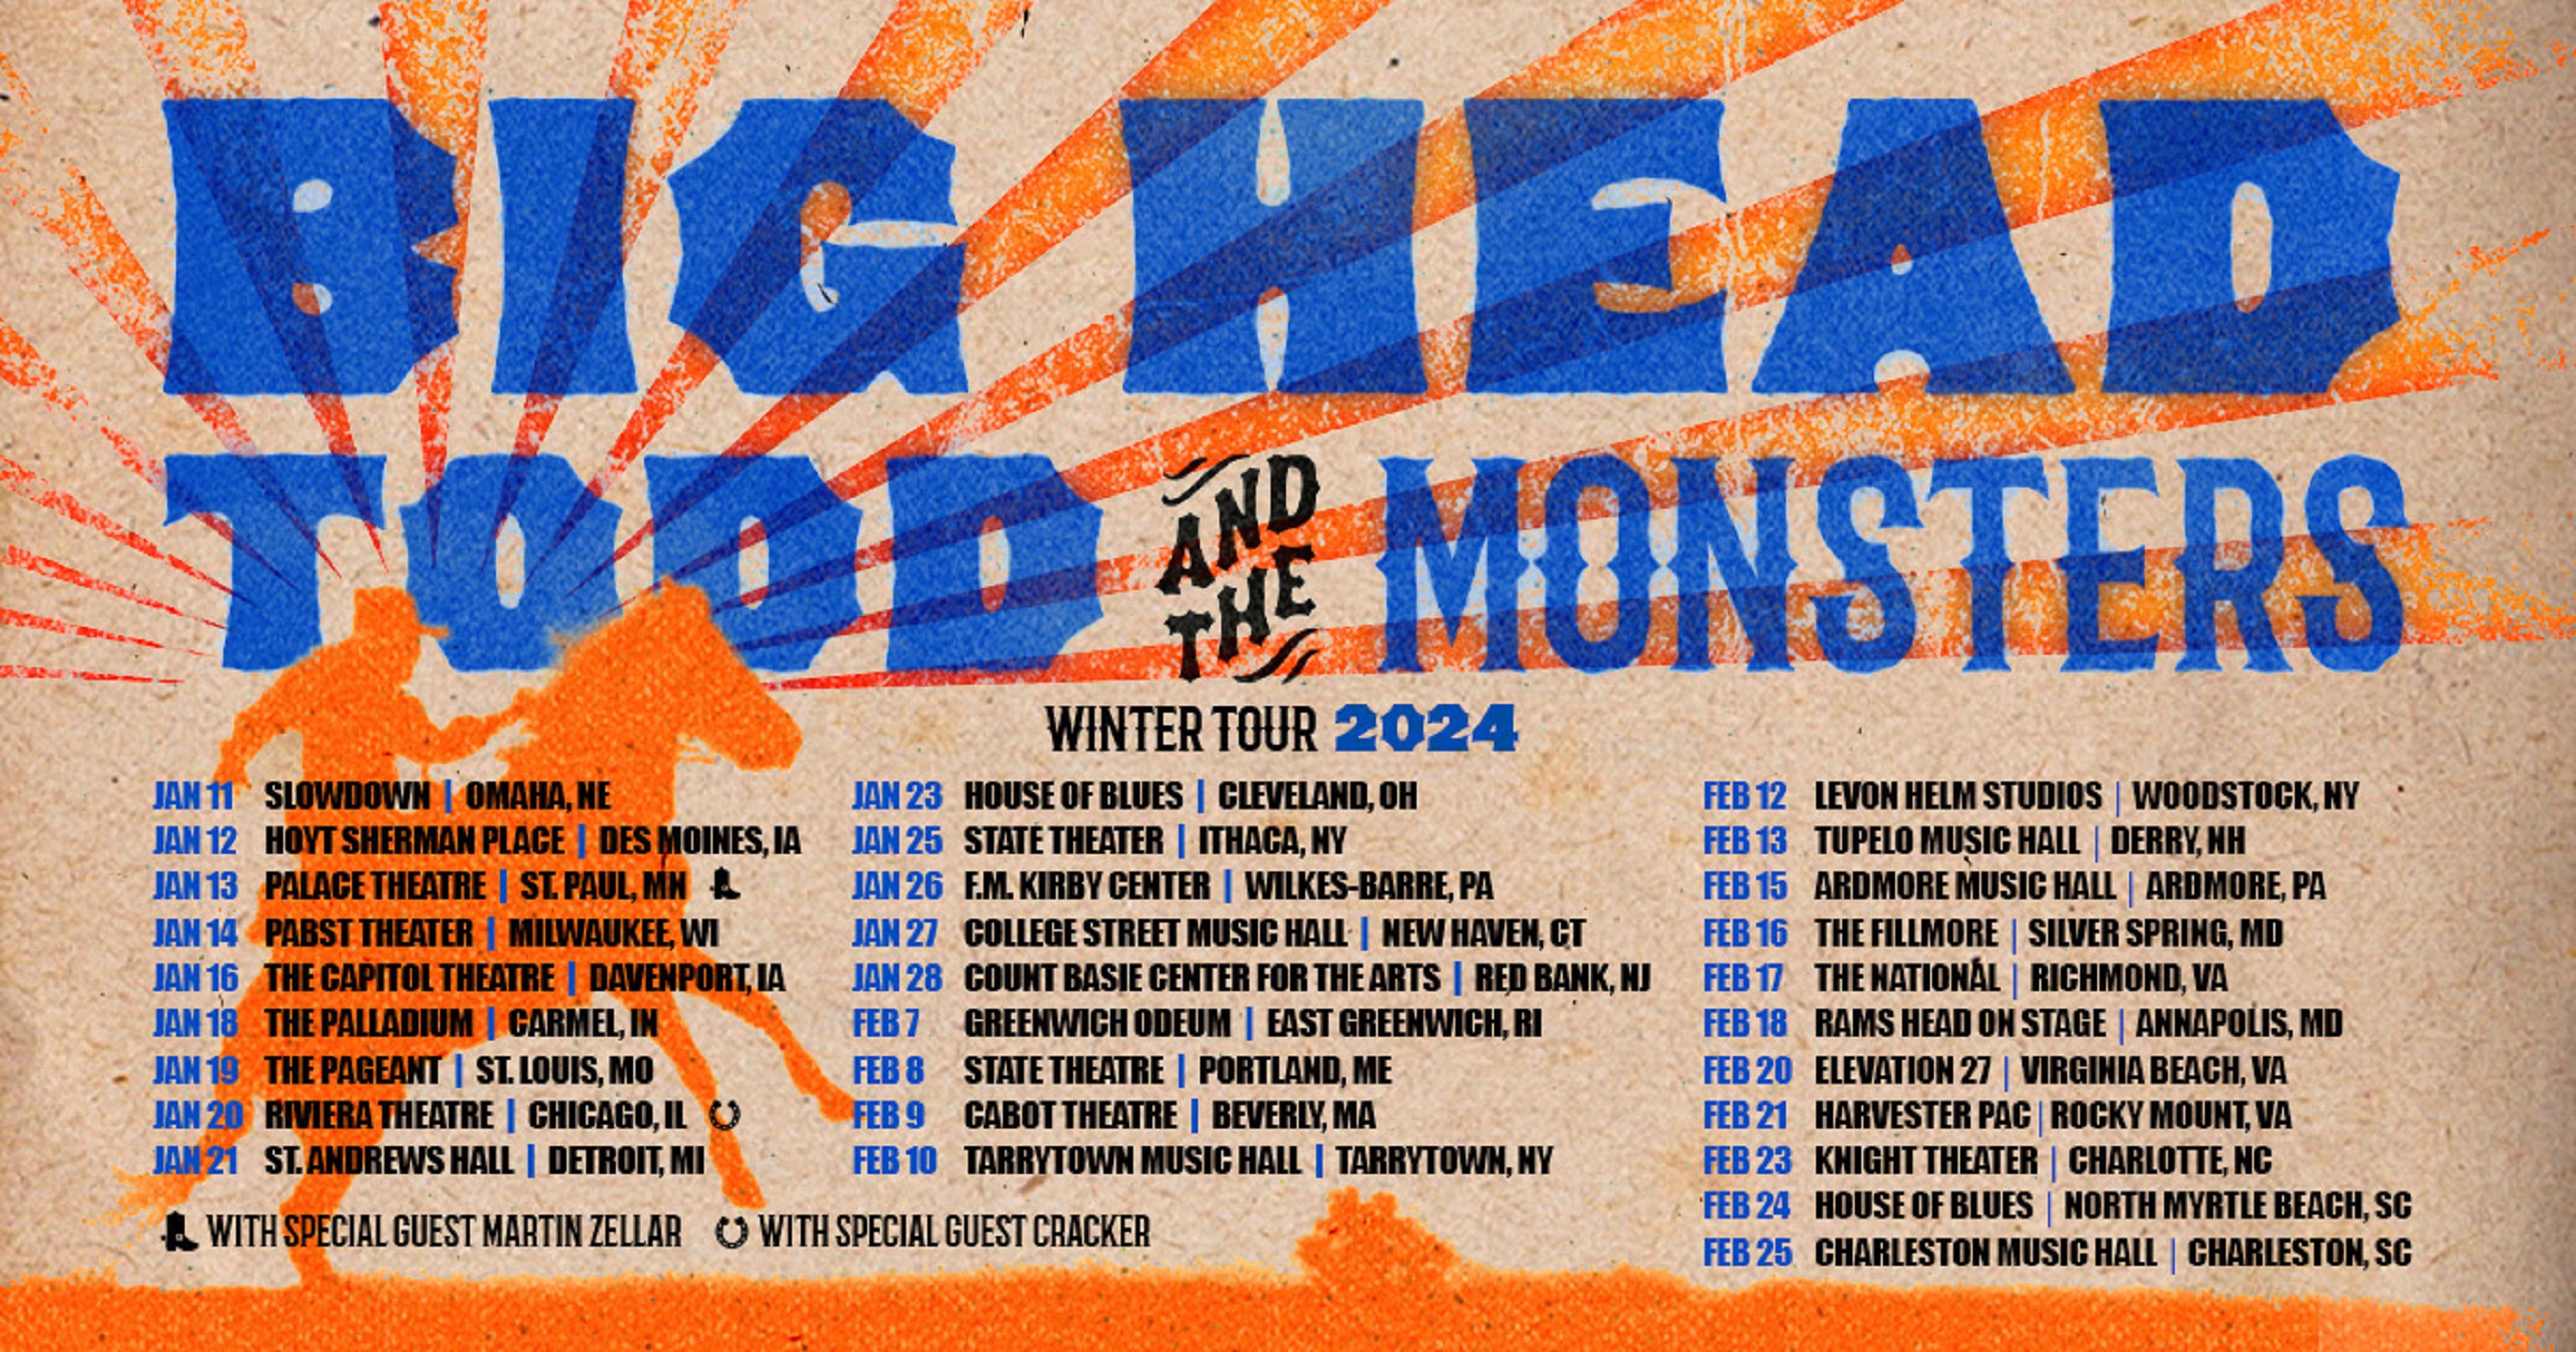 Big Head Todd and The Monsters Announce Winter Tour 2024